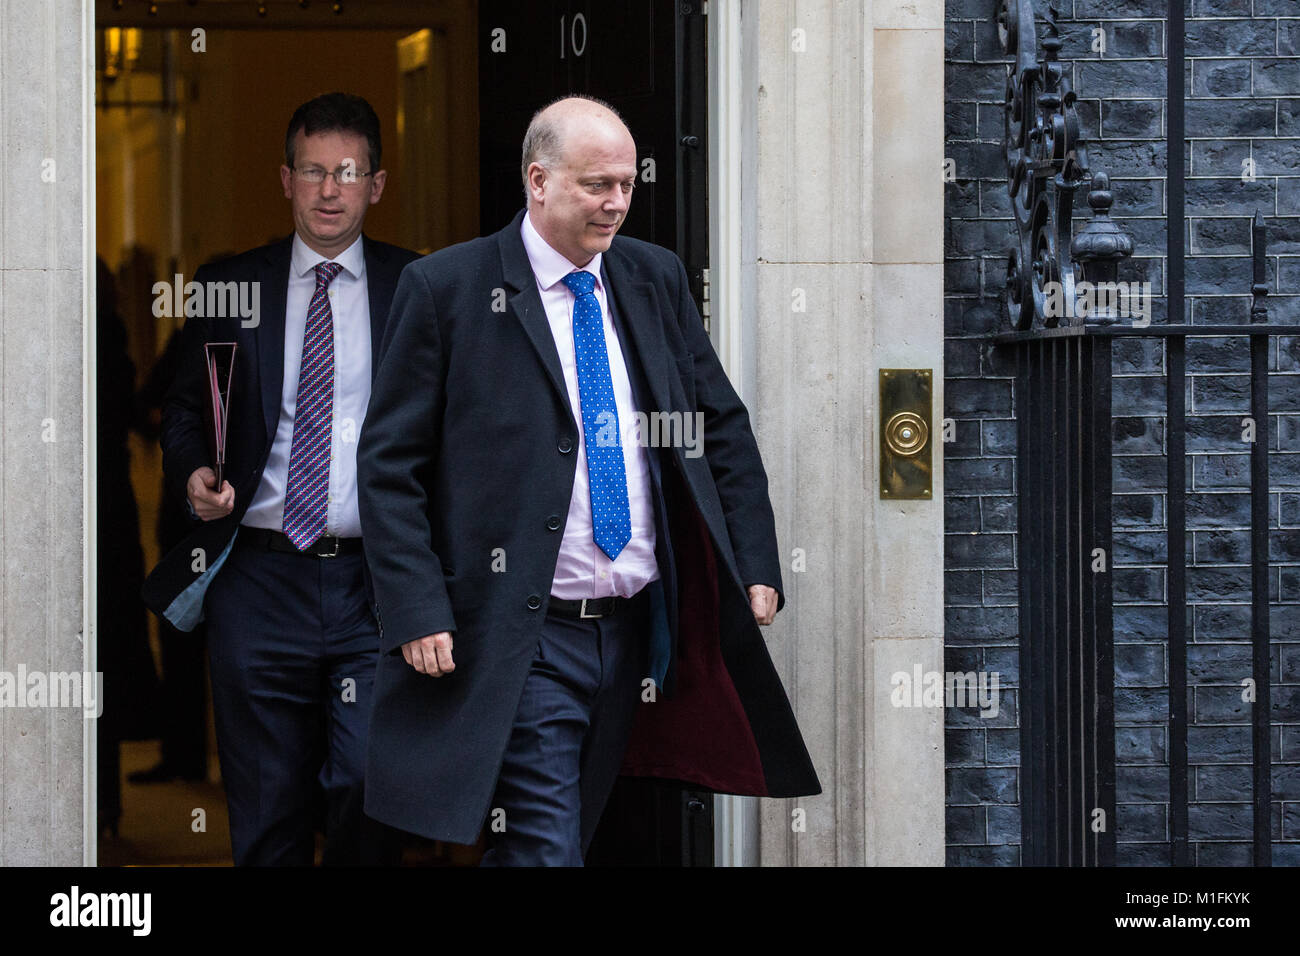 London, UK. 30th January, 2018. Chris Grayling MP, Secretary of State for Transport, and Jeremy Wright MP QC, Attorney General, leave 10 Downing Street following a Cabinet meeting. Credit: Mark Kerrison/Alamy Live News Stock Photo